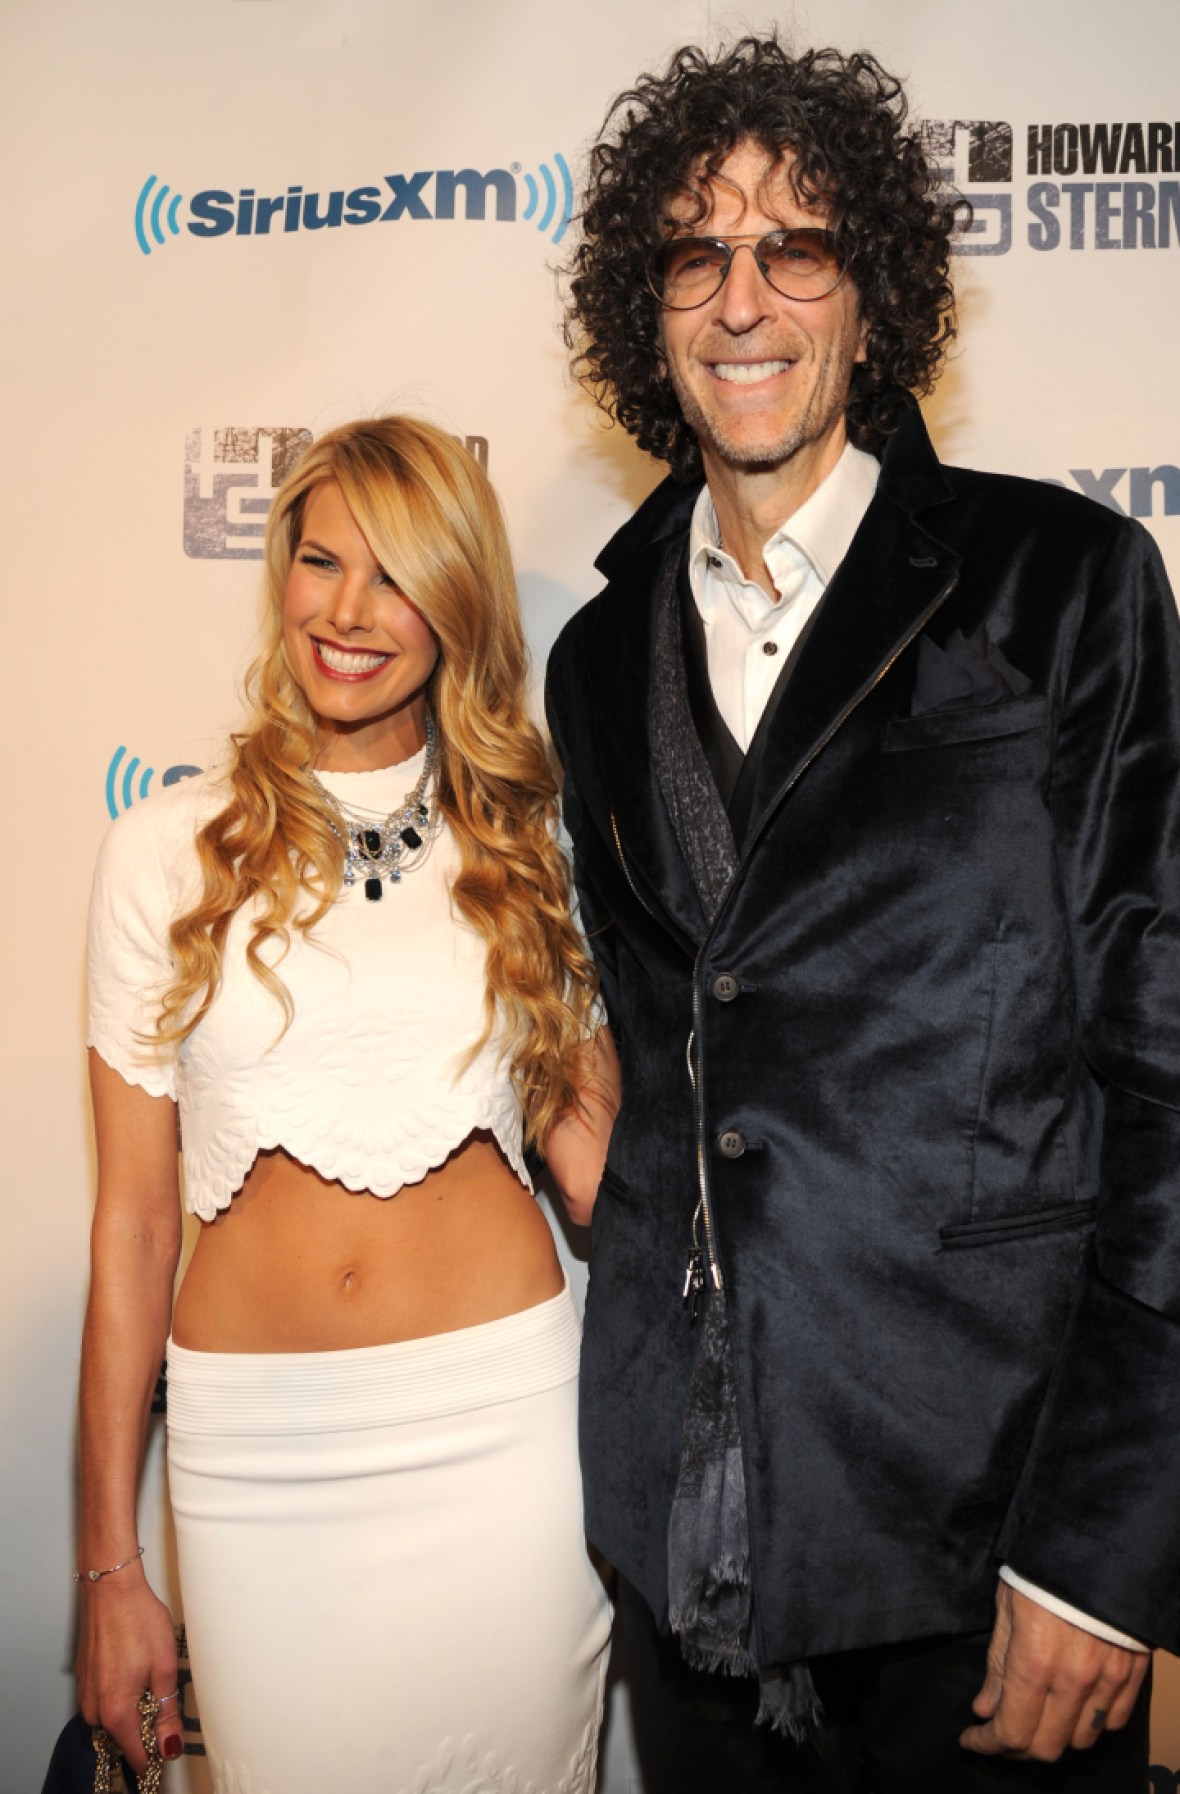 Beth Stern Opens Up About Her Sweet Relationship With Husband Howard Stern Closer Weekly 2884